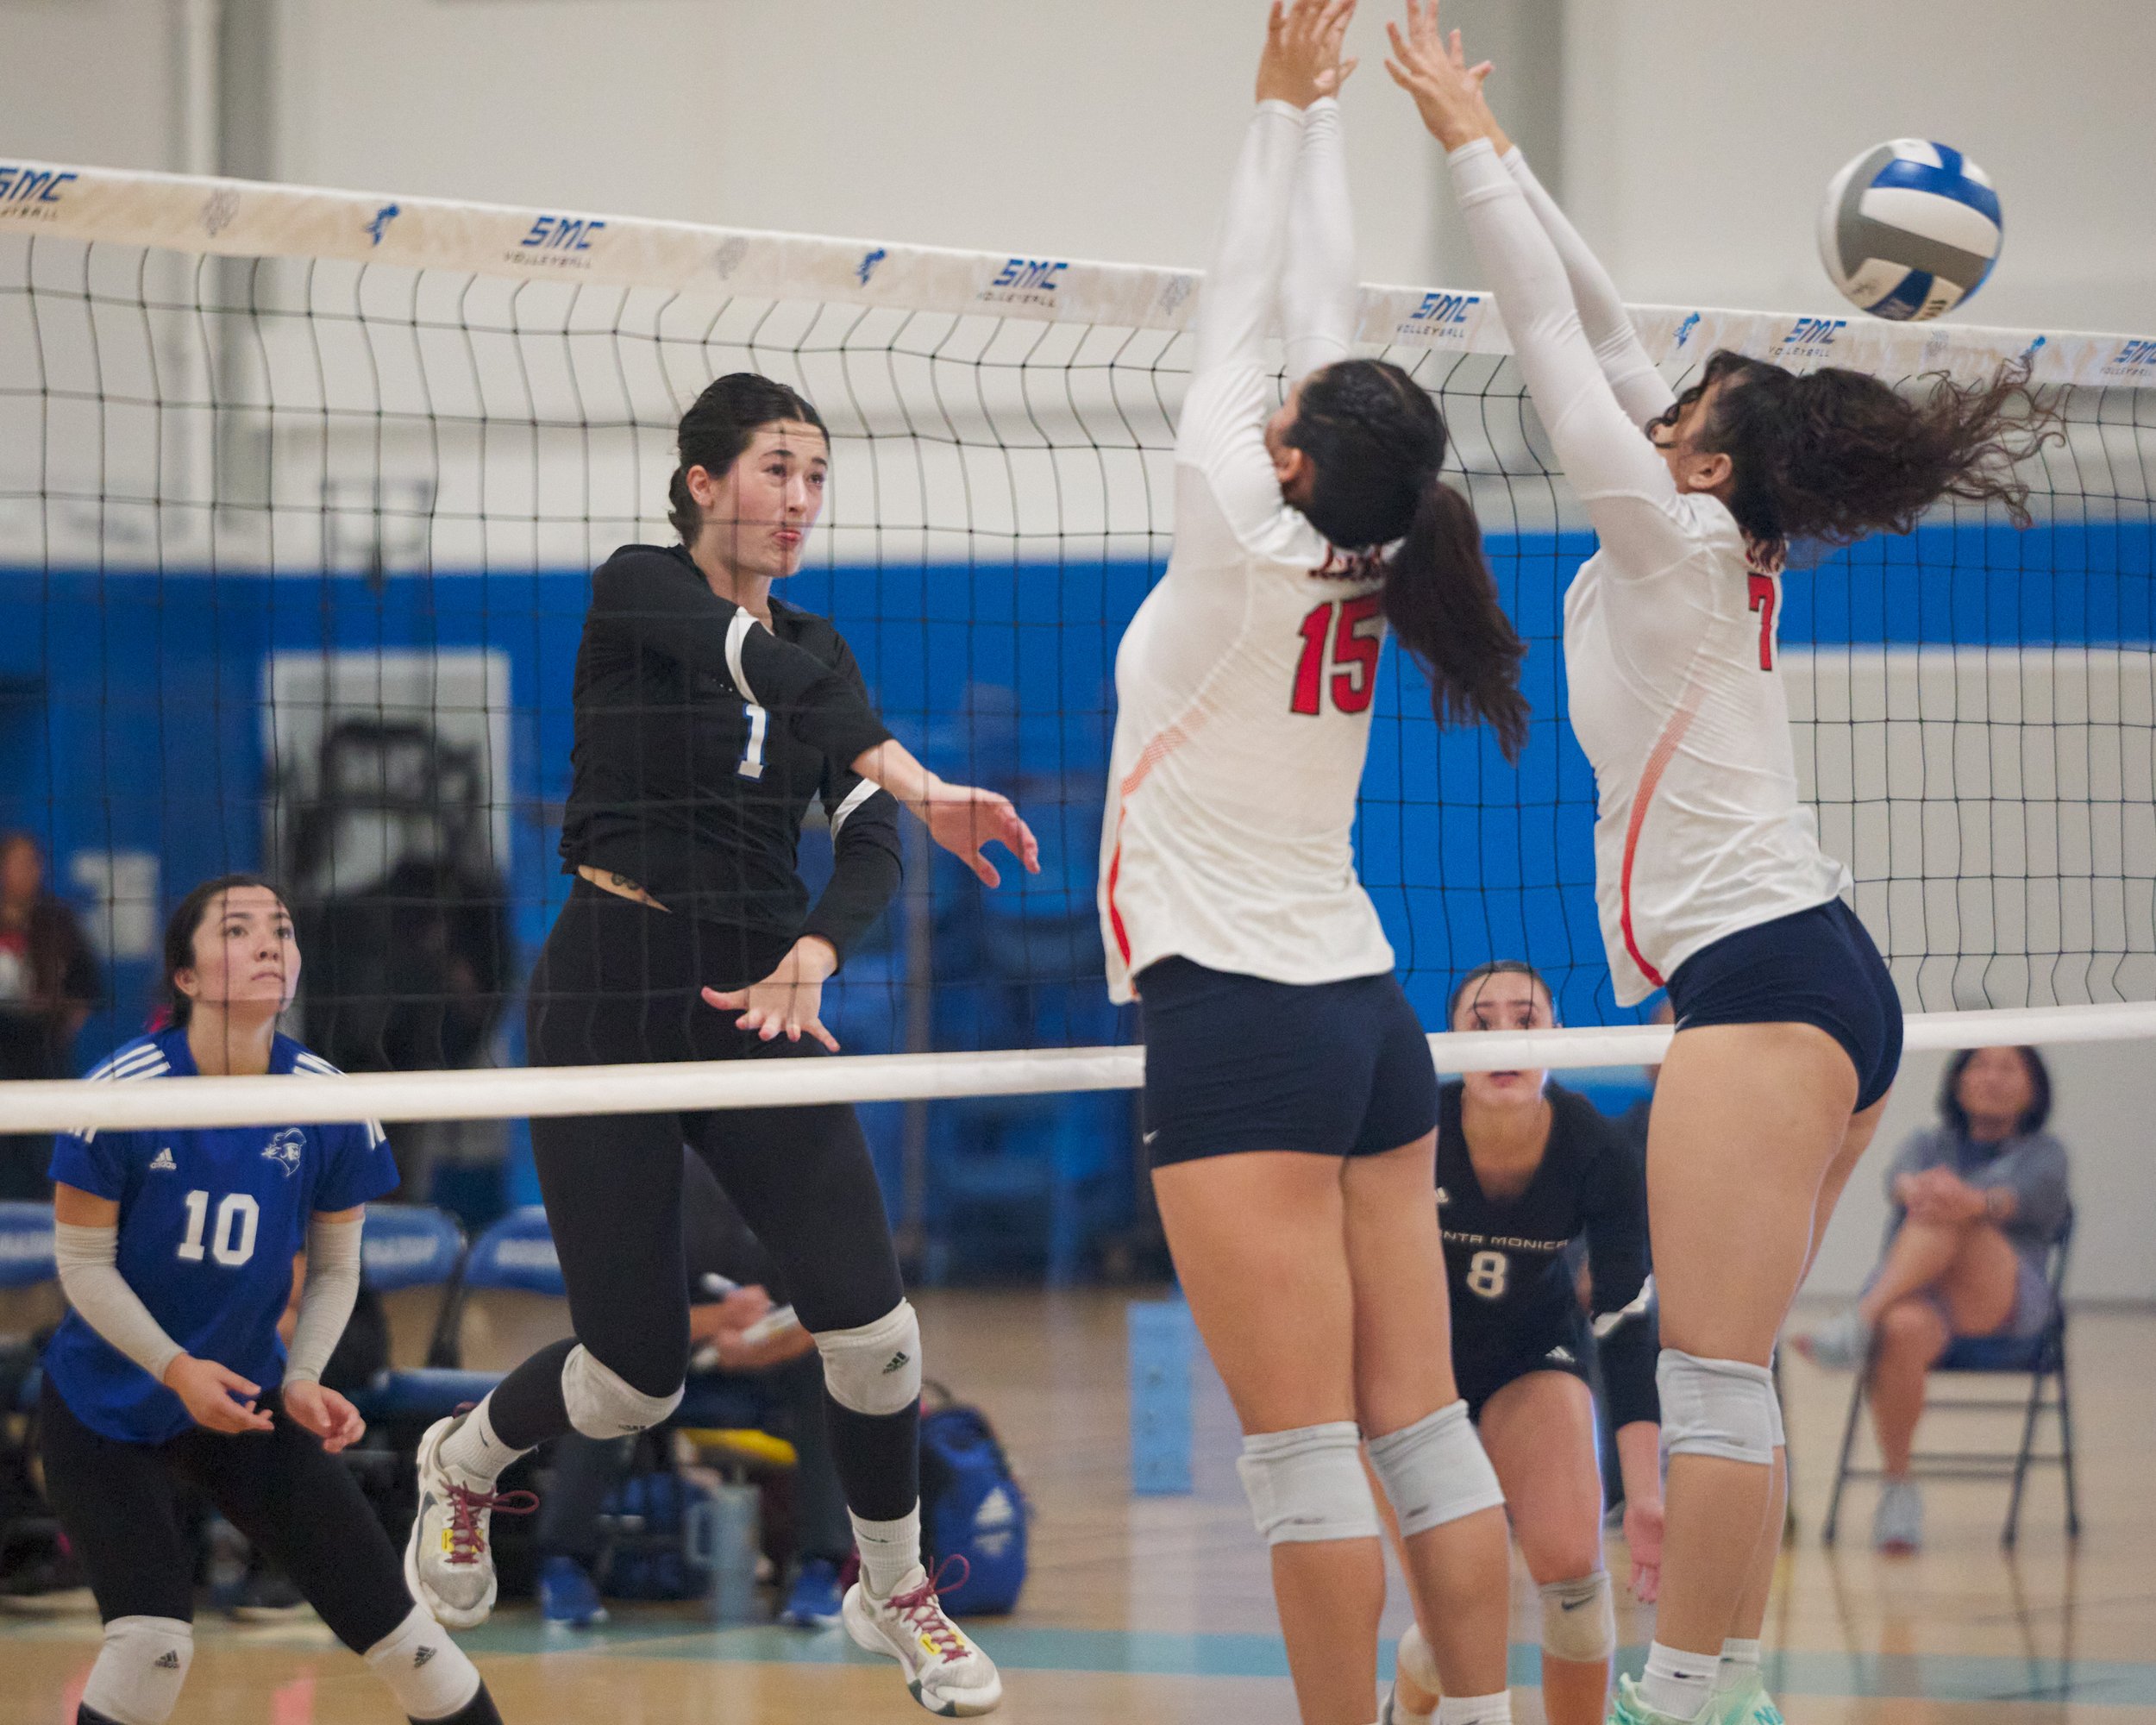  Santa Monica College Corsairs' Maiella Riva hits the ball past Citrus College Owls' Desiree Reyes and Tara Biscan during the women's volleyball match on Wednesday, Oct. 25, 2026, at Corsair Gym in Santa Monica, Calif. The Corsairs won 3-0. (Nicholas